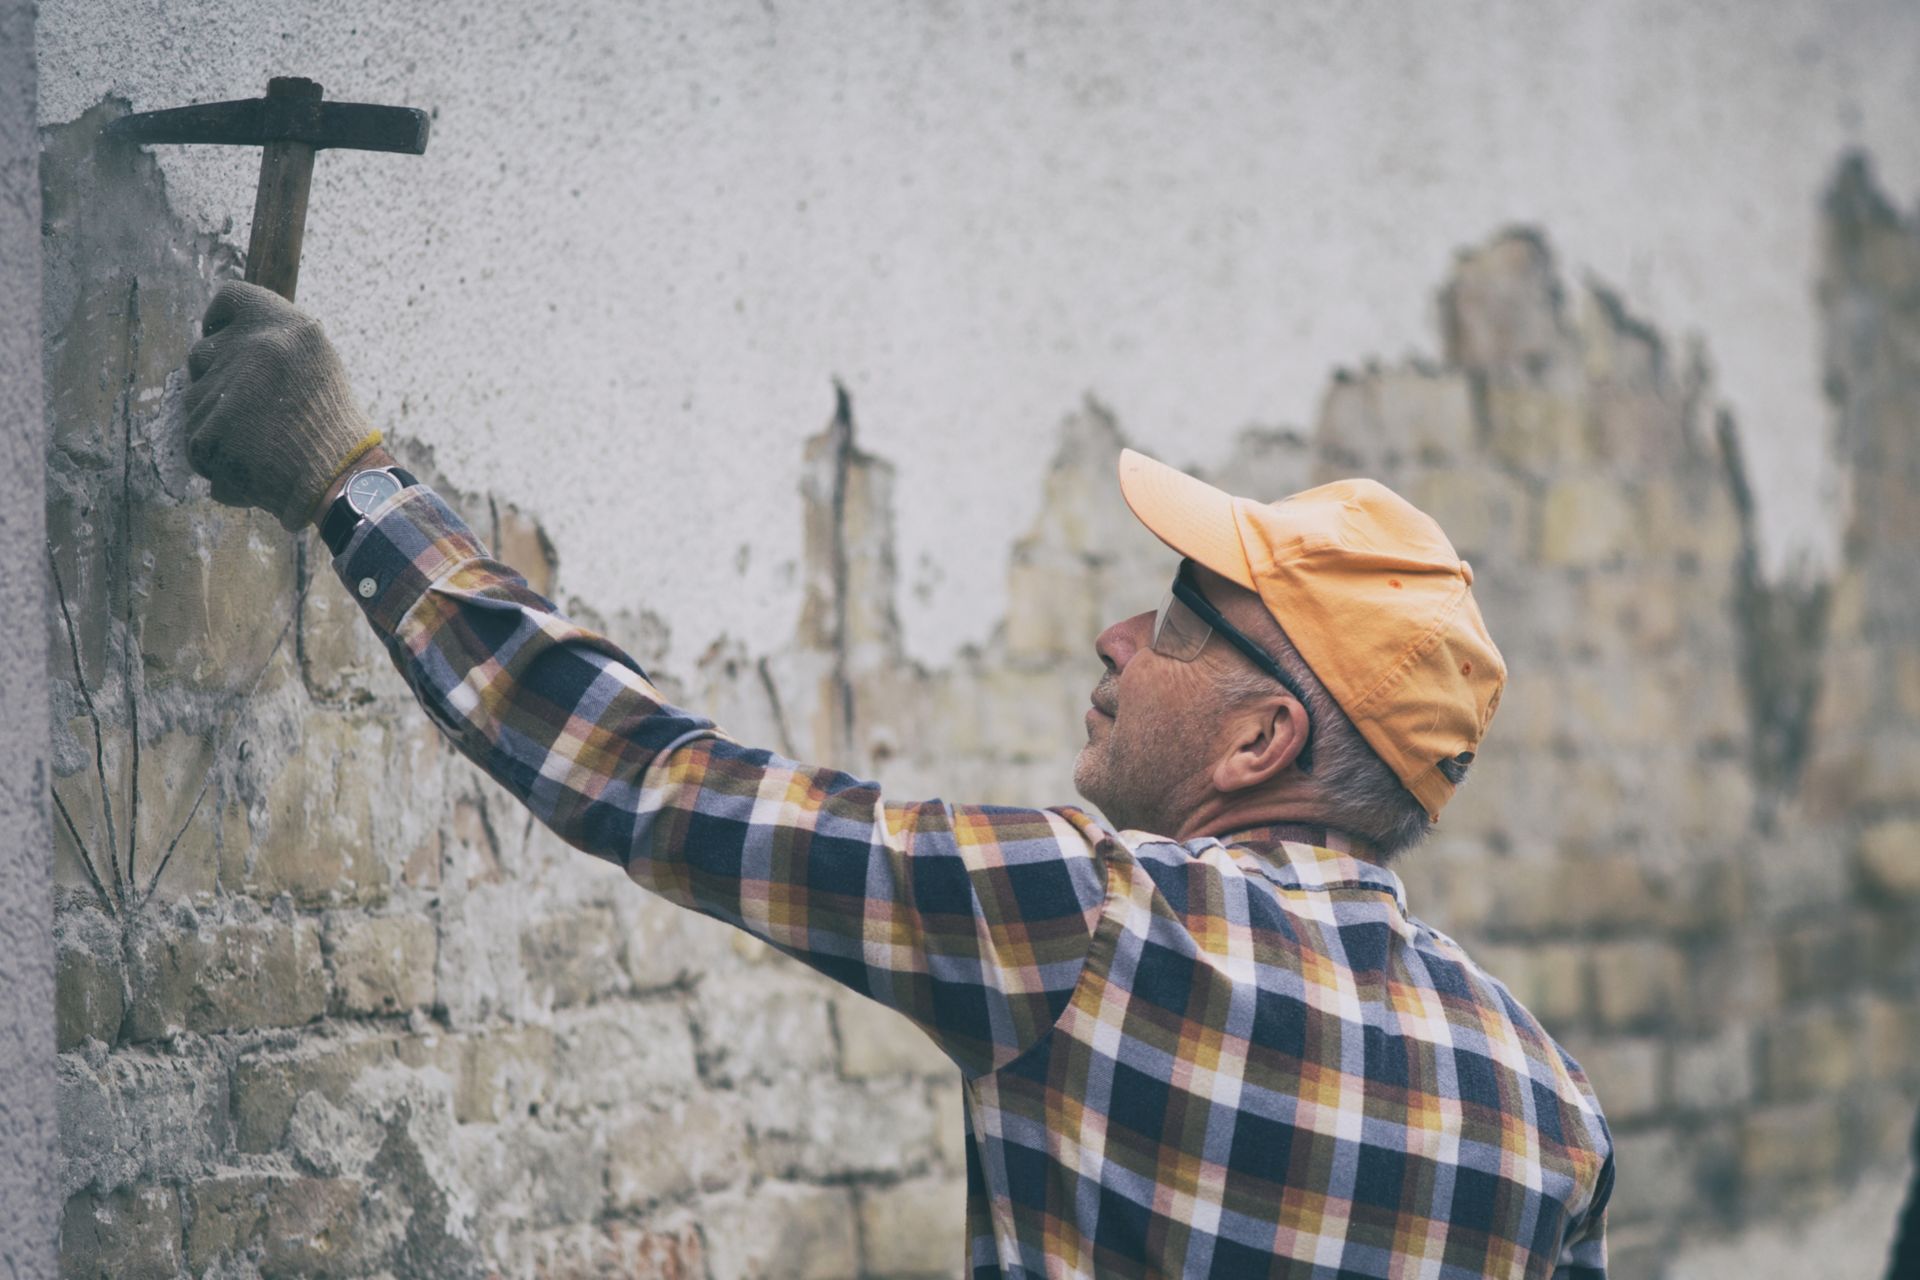 Mature construction worker breaking mortar from old brick wall